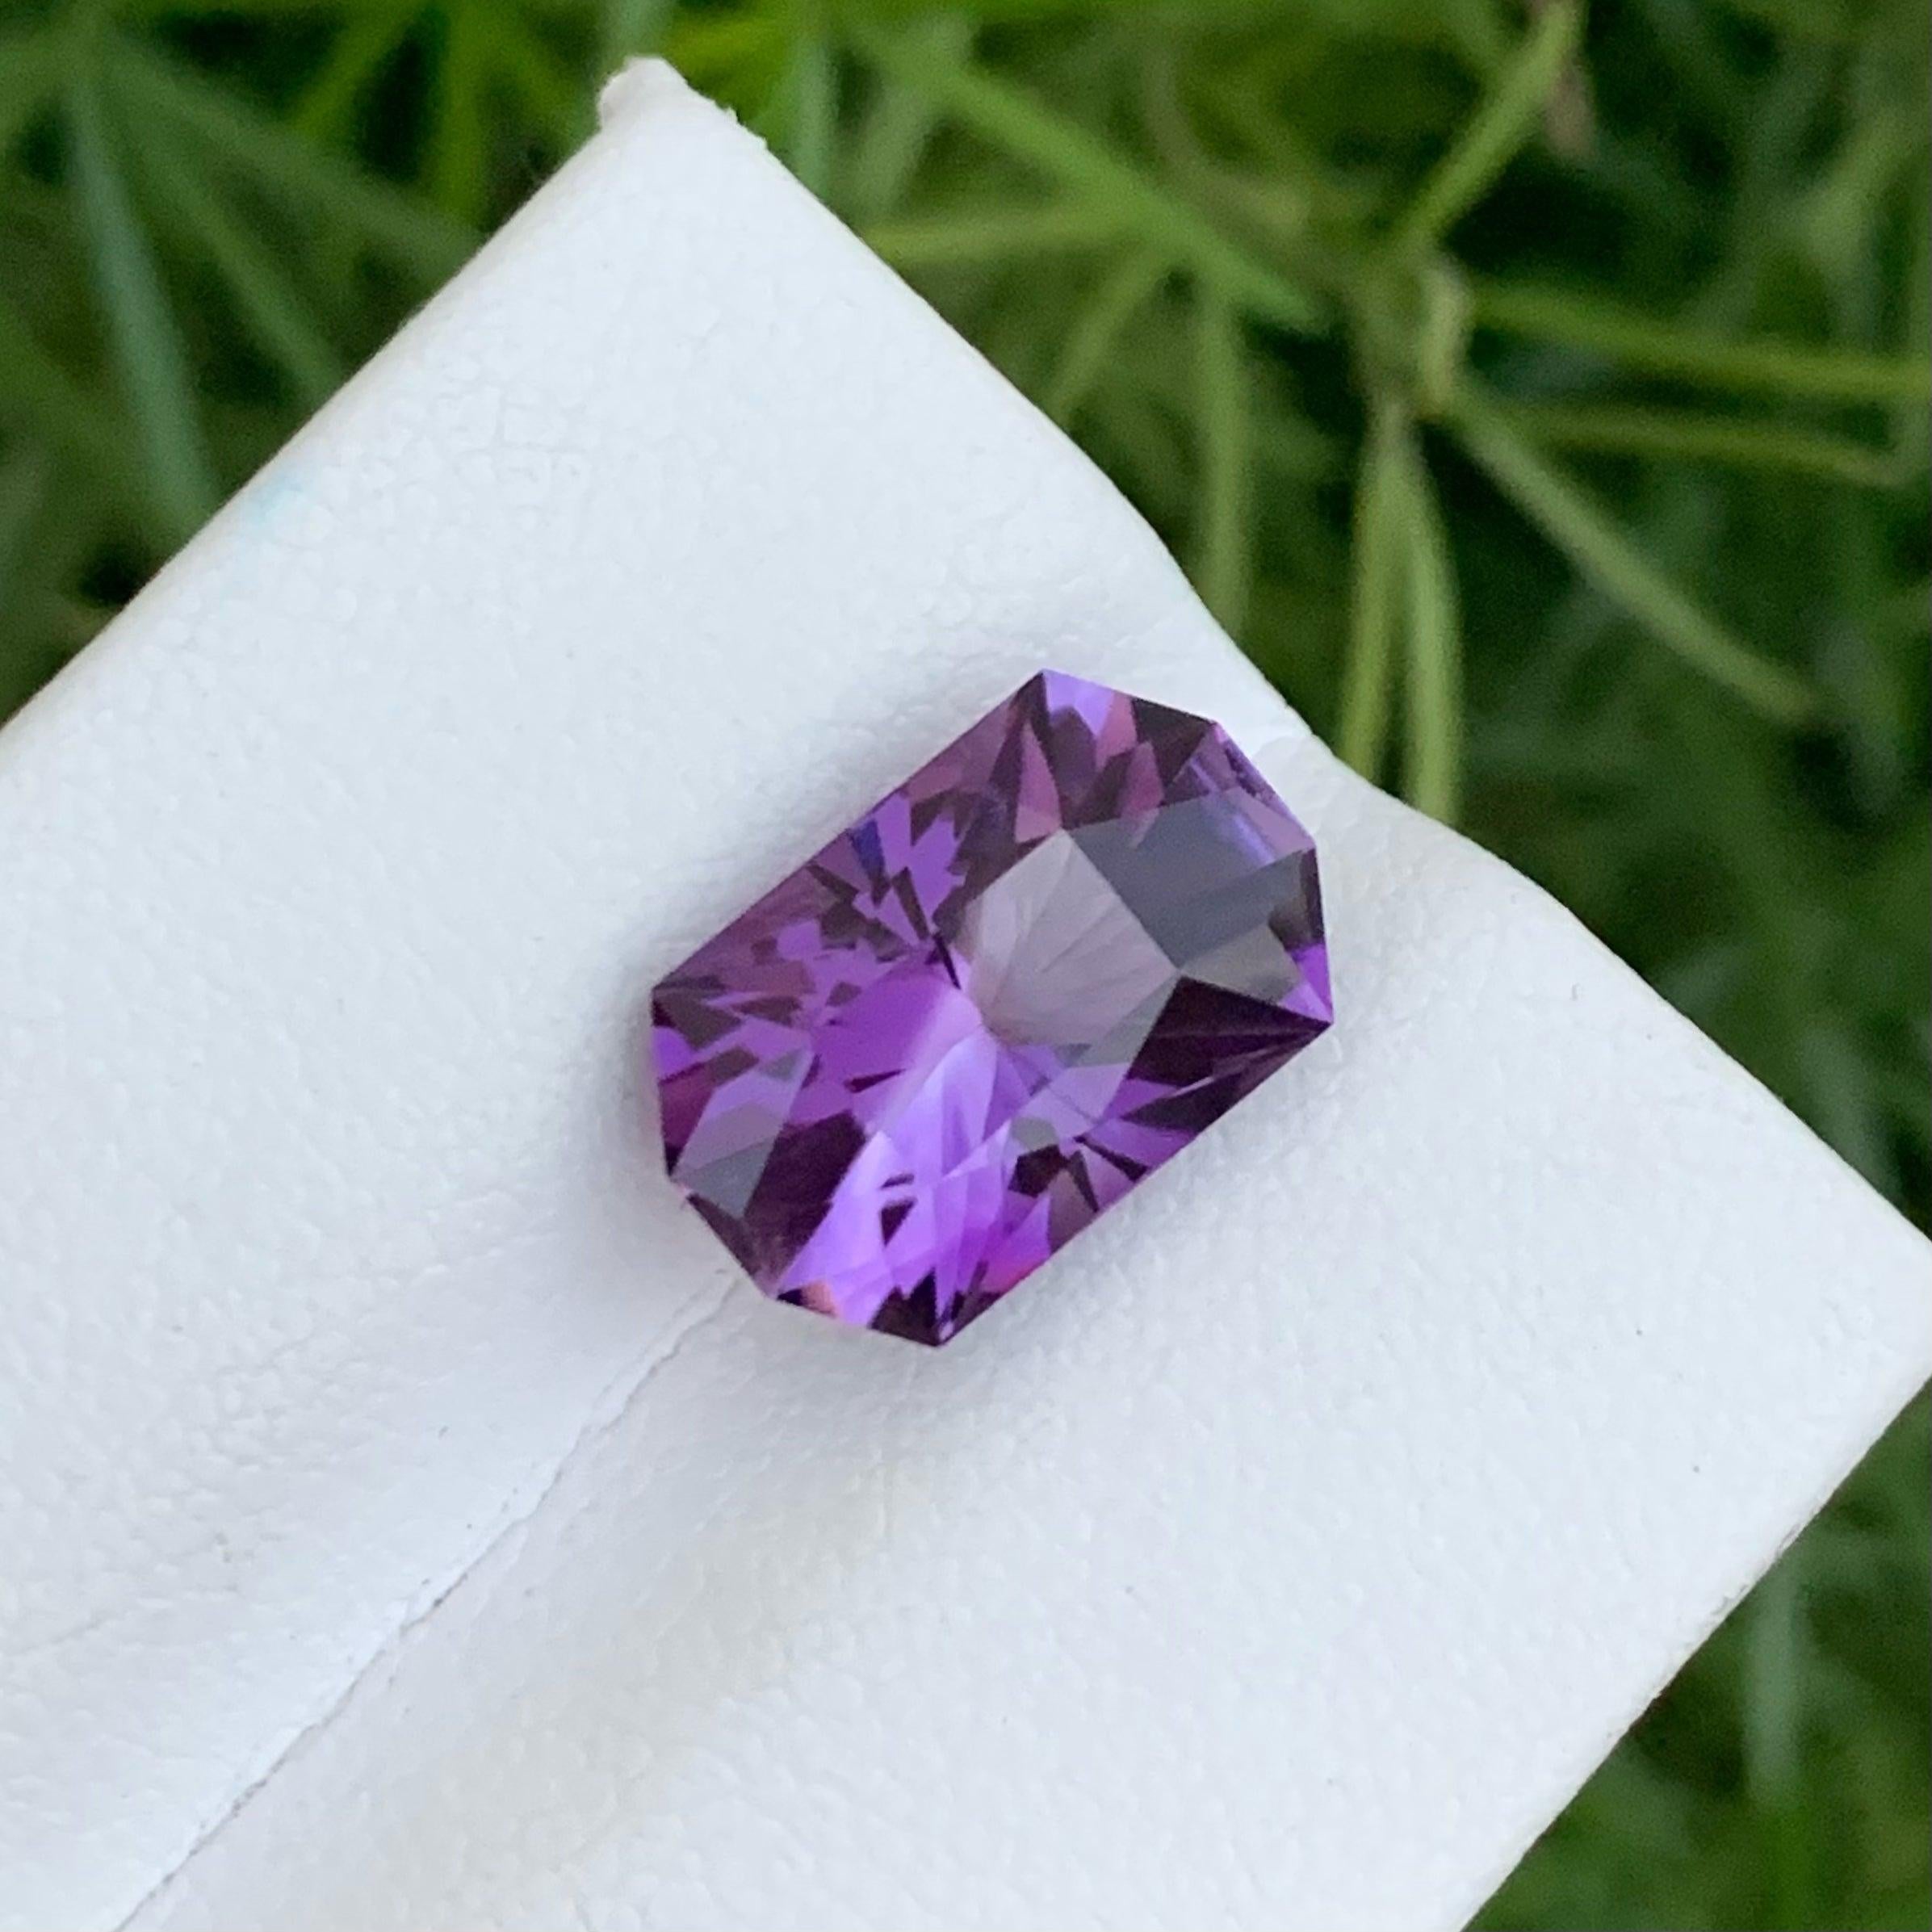 Mixed Cut Exquisite Fancy Cut Loose Amethyst Gemstone 4.35 Carats Amethyst Jewelry For Sale